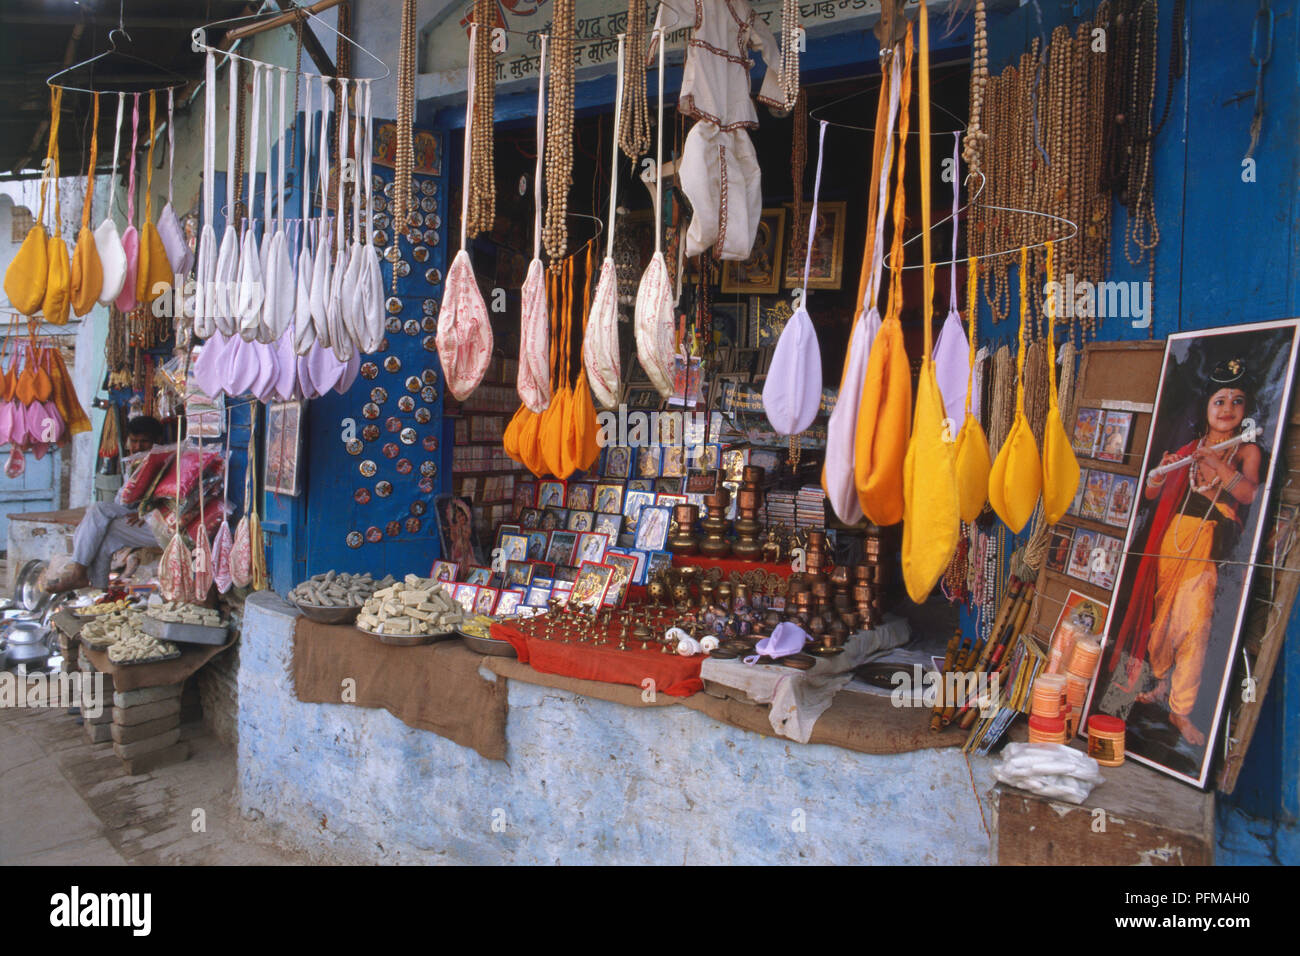 India, Govardhan, pilgrim town, stall selling brightly coloured cloth items, beads, ornaments and religious pictures. Stock Photo